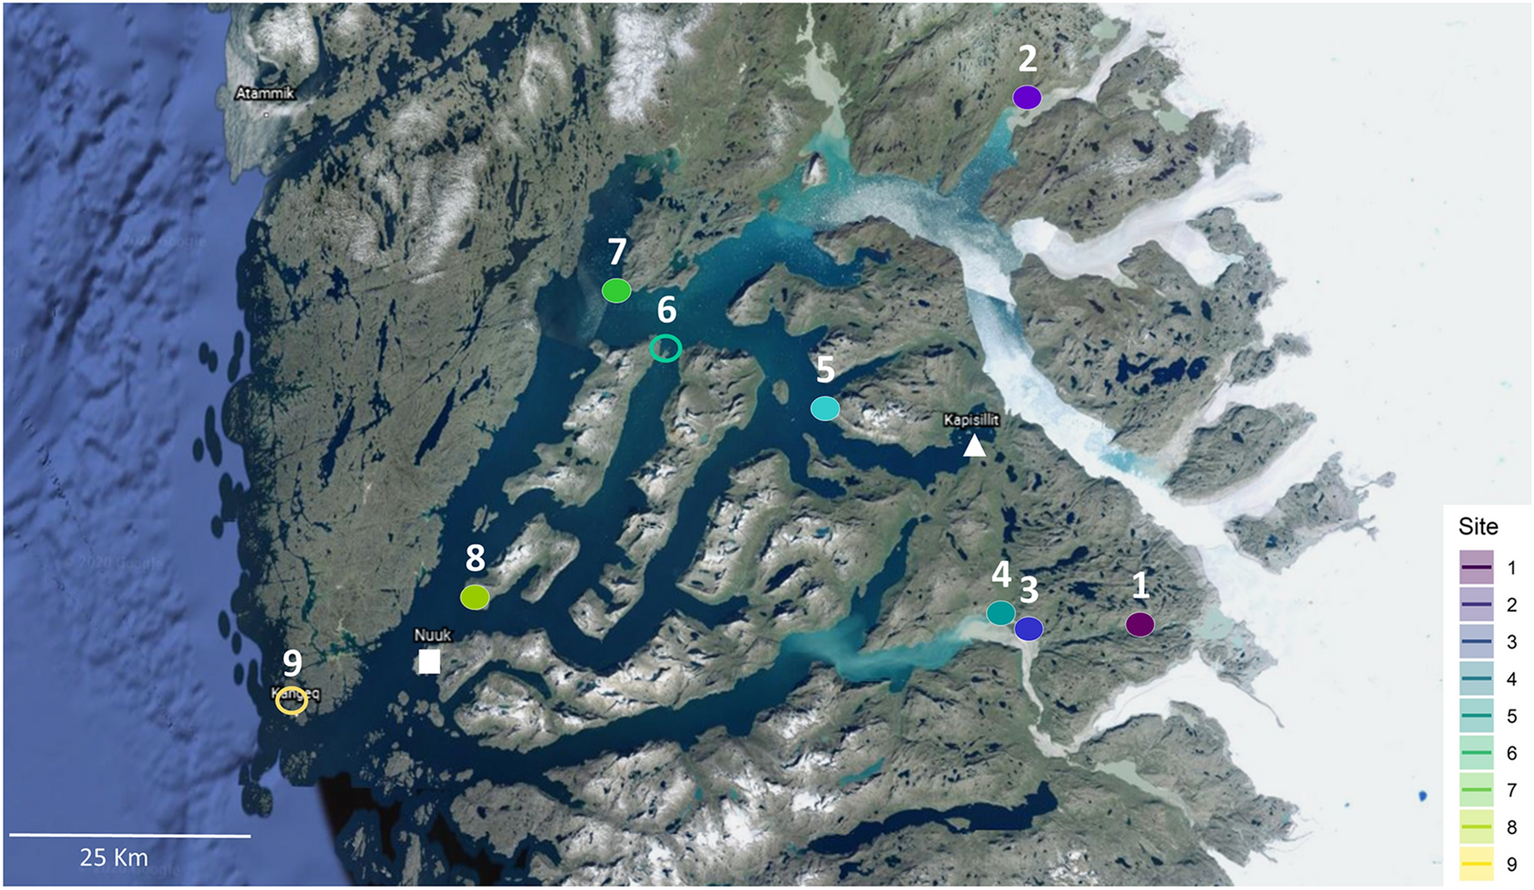 Influences of summer warming and nutrient availability Salix glauca L. growth in along an ice to sea gradient | Scientific Reports